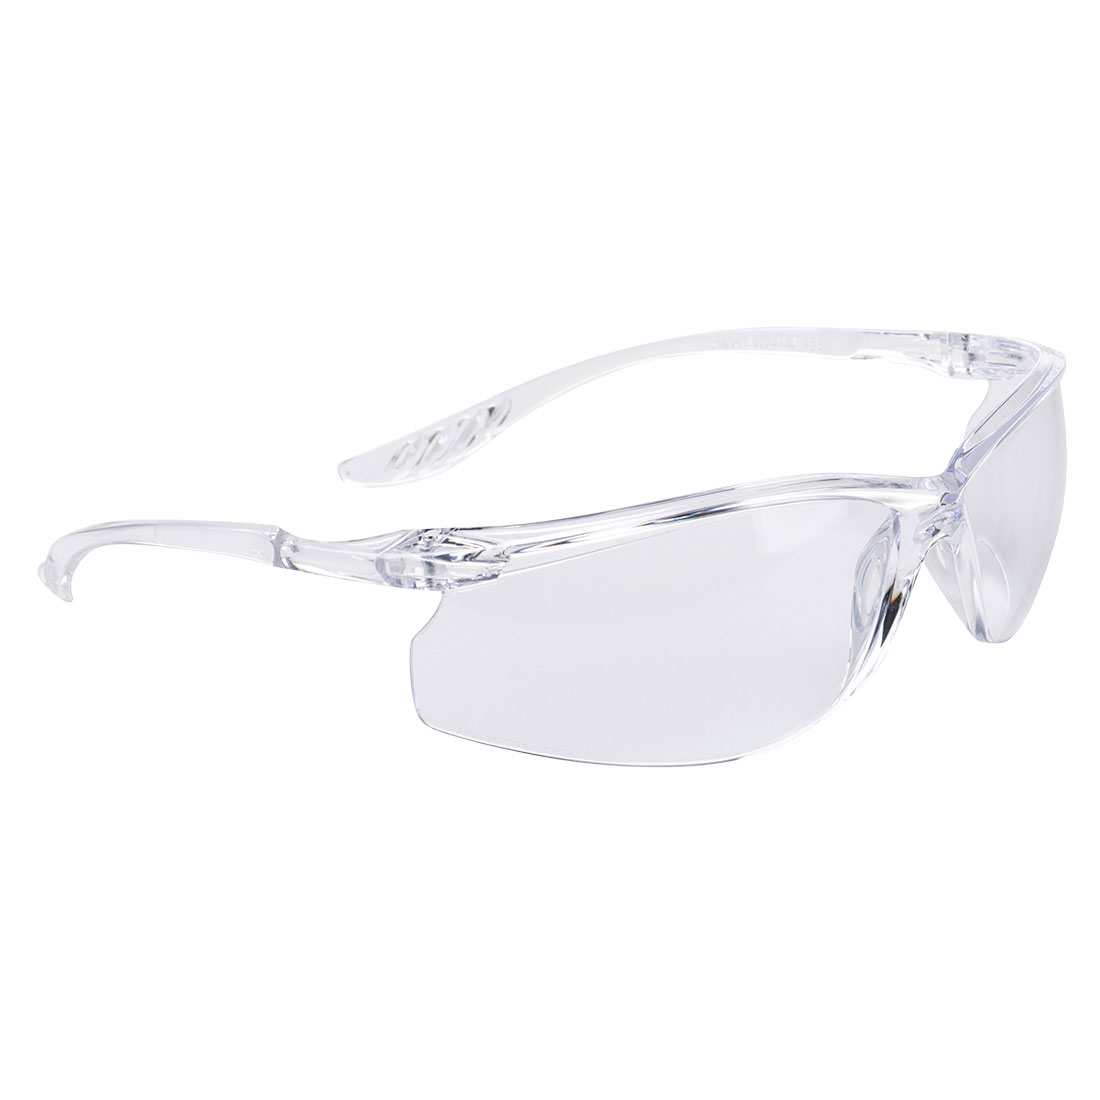 Lite Safety Spectacles